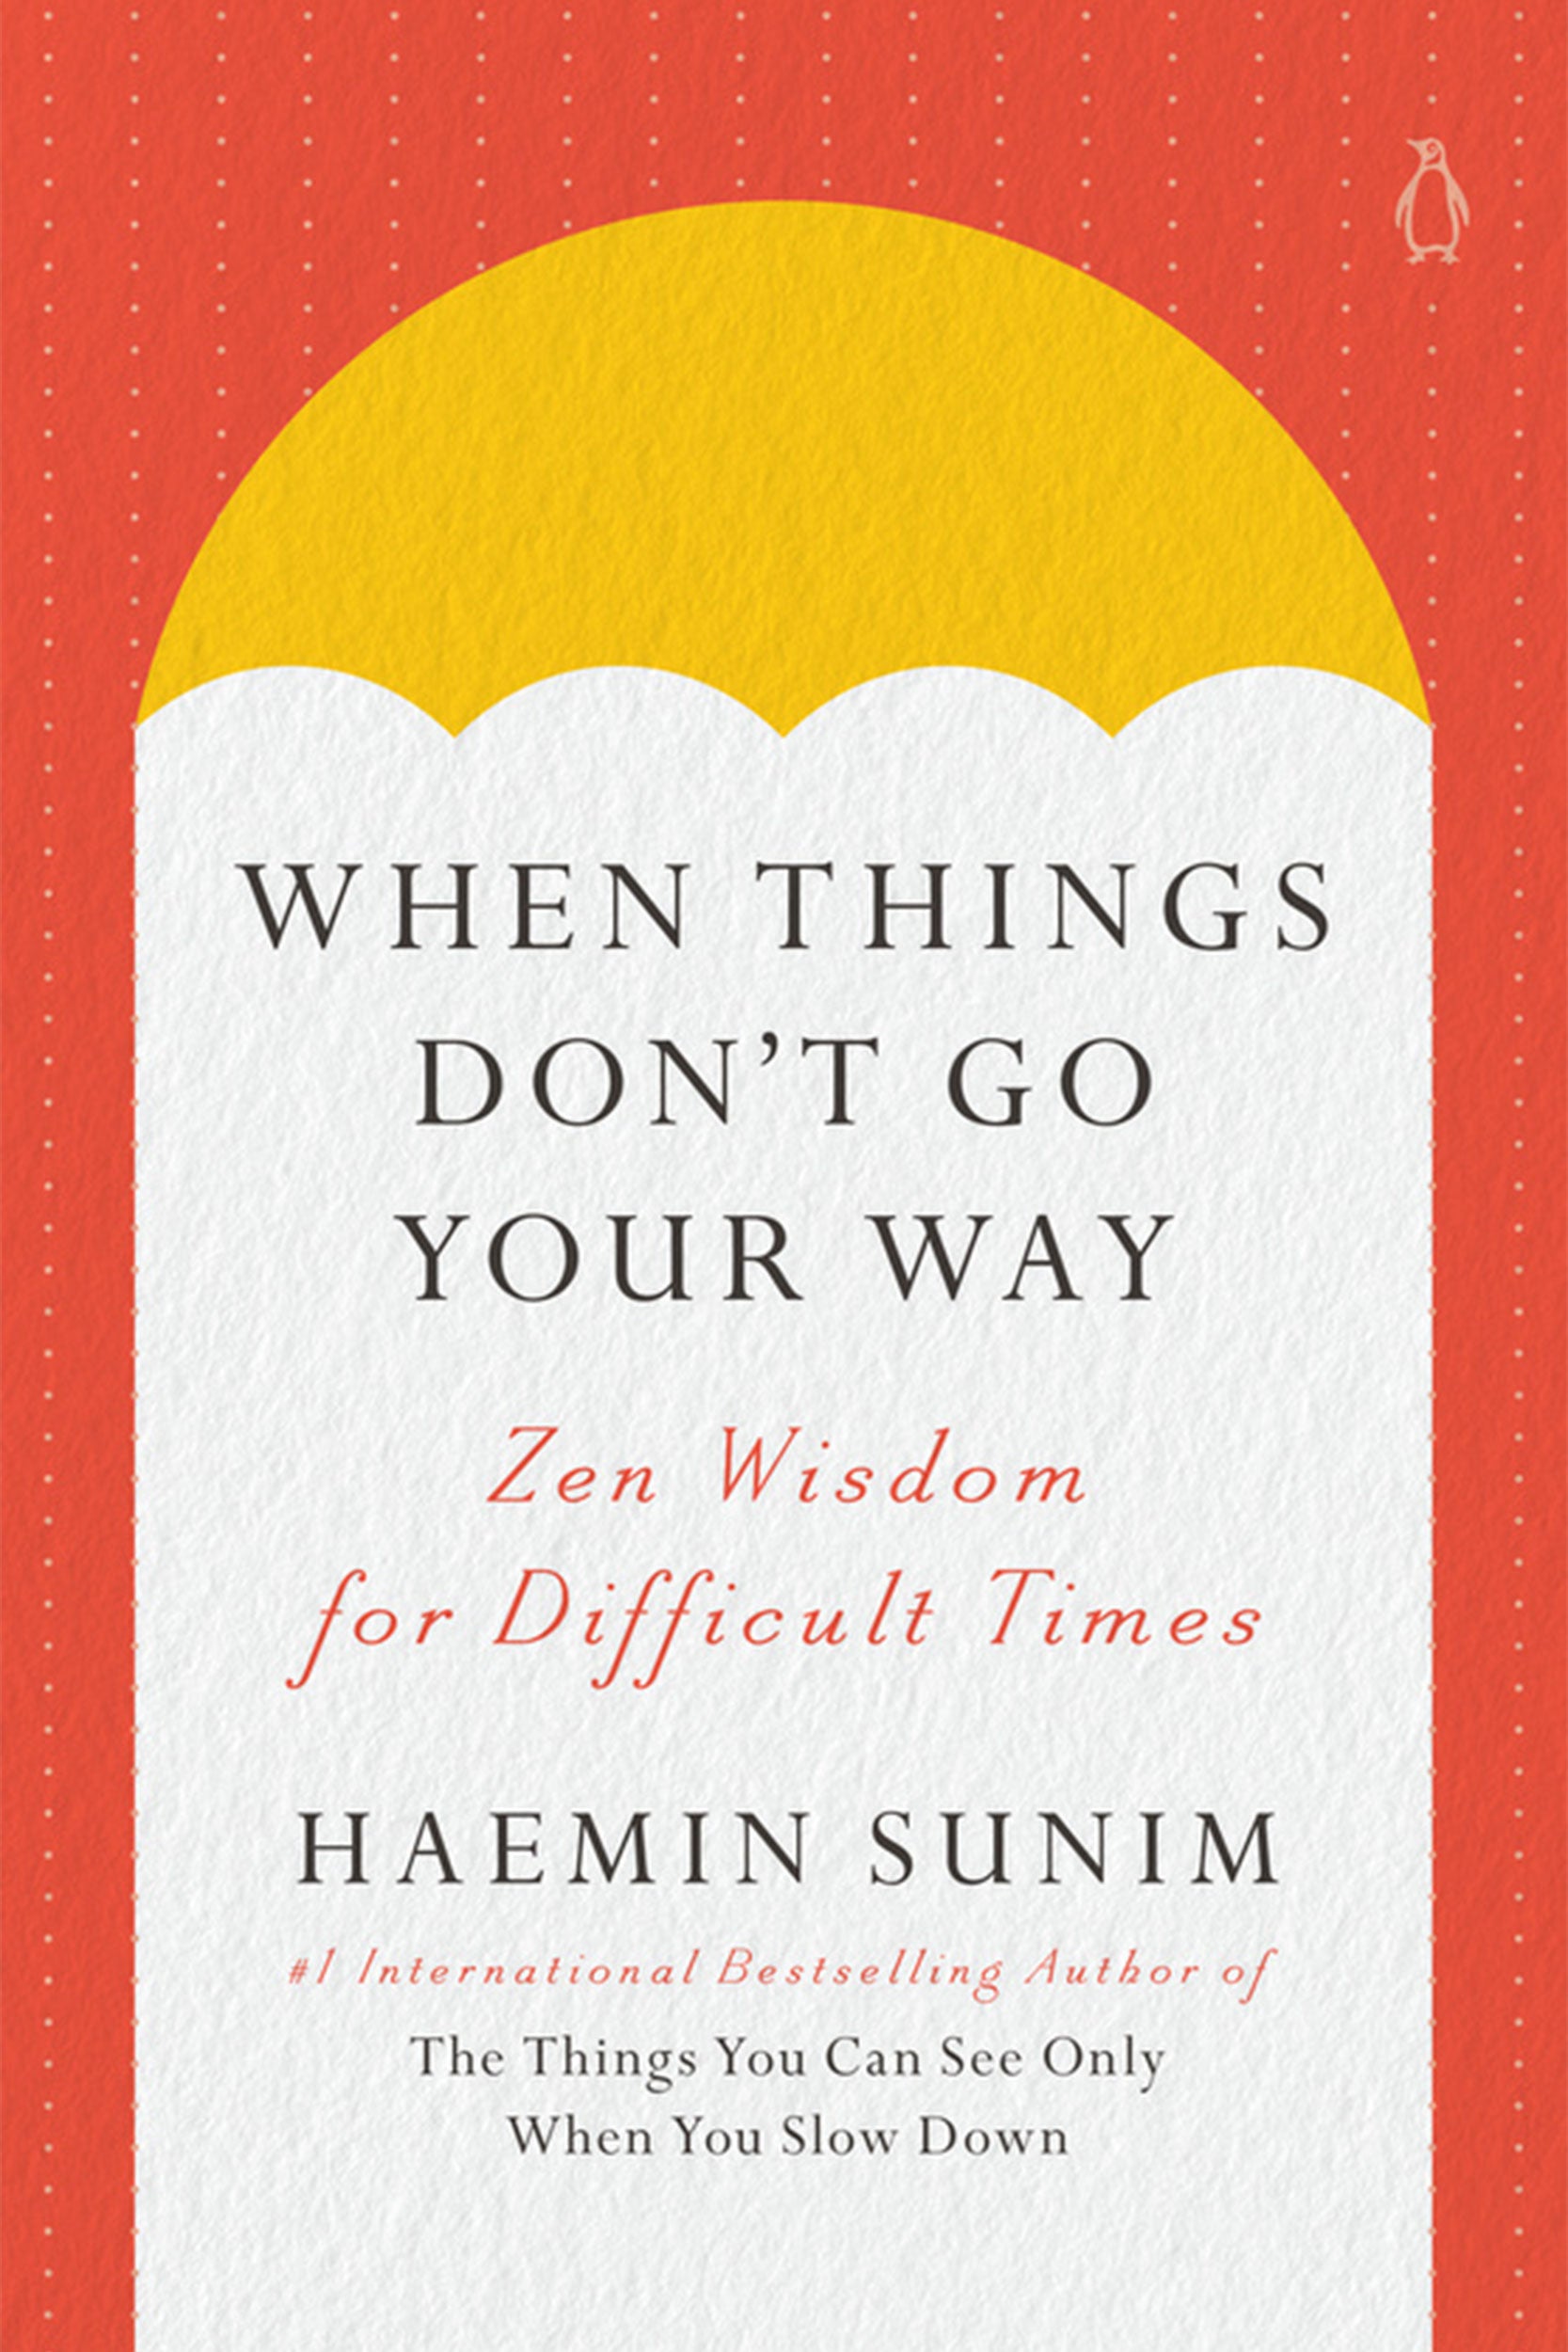 Cover of ‘When Things Don’t Go Your Way’ by Haemin Sunim.